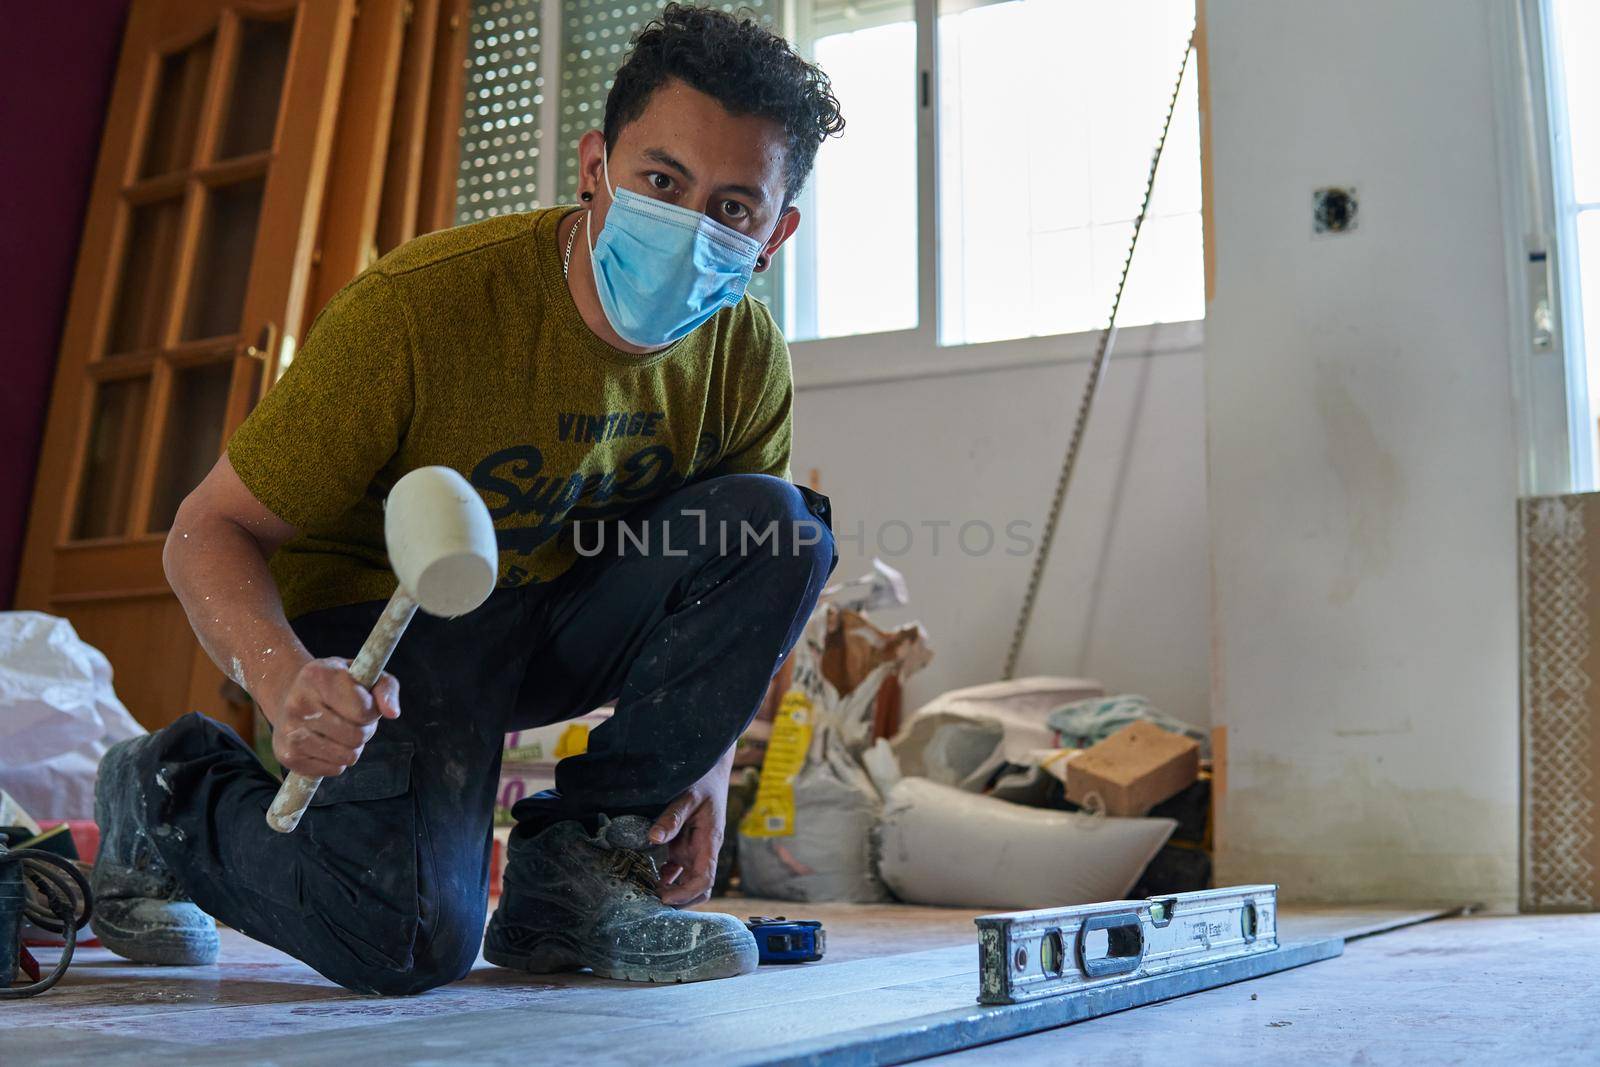 Mason tiling a room with a mustard-colored t-shirt and rubber pot and level and with a mask